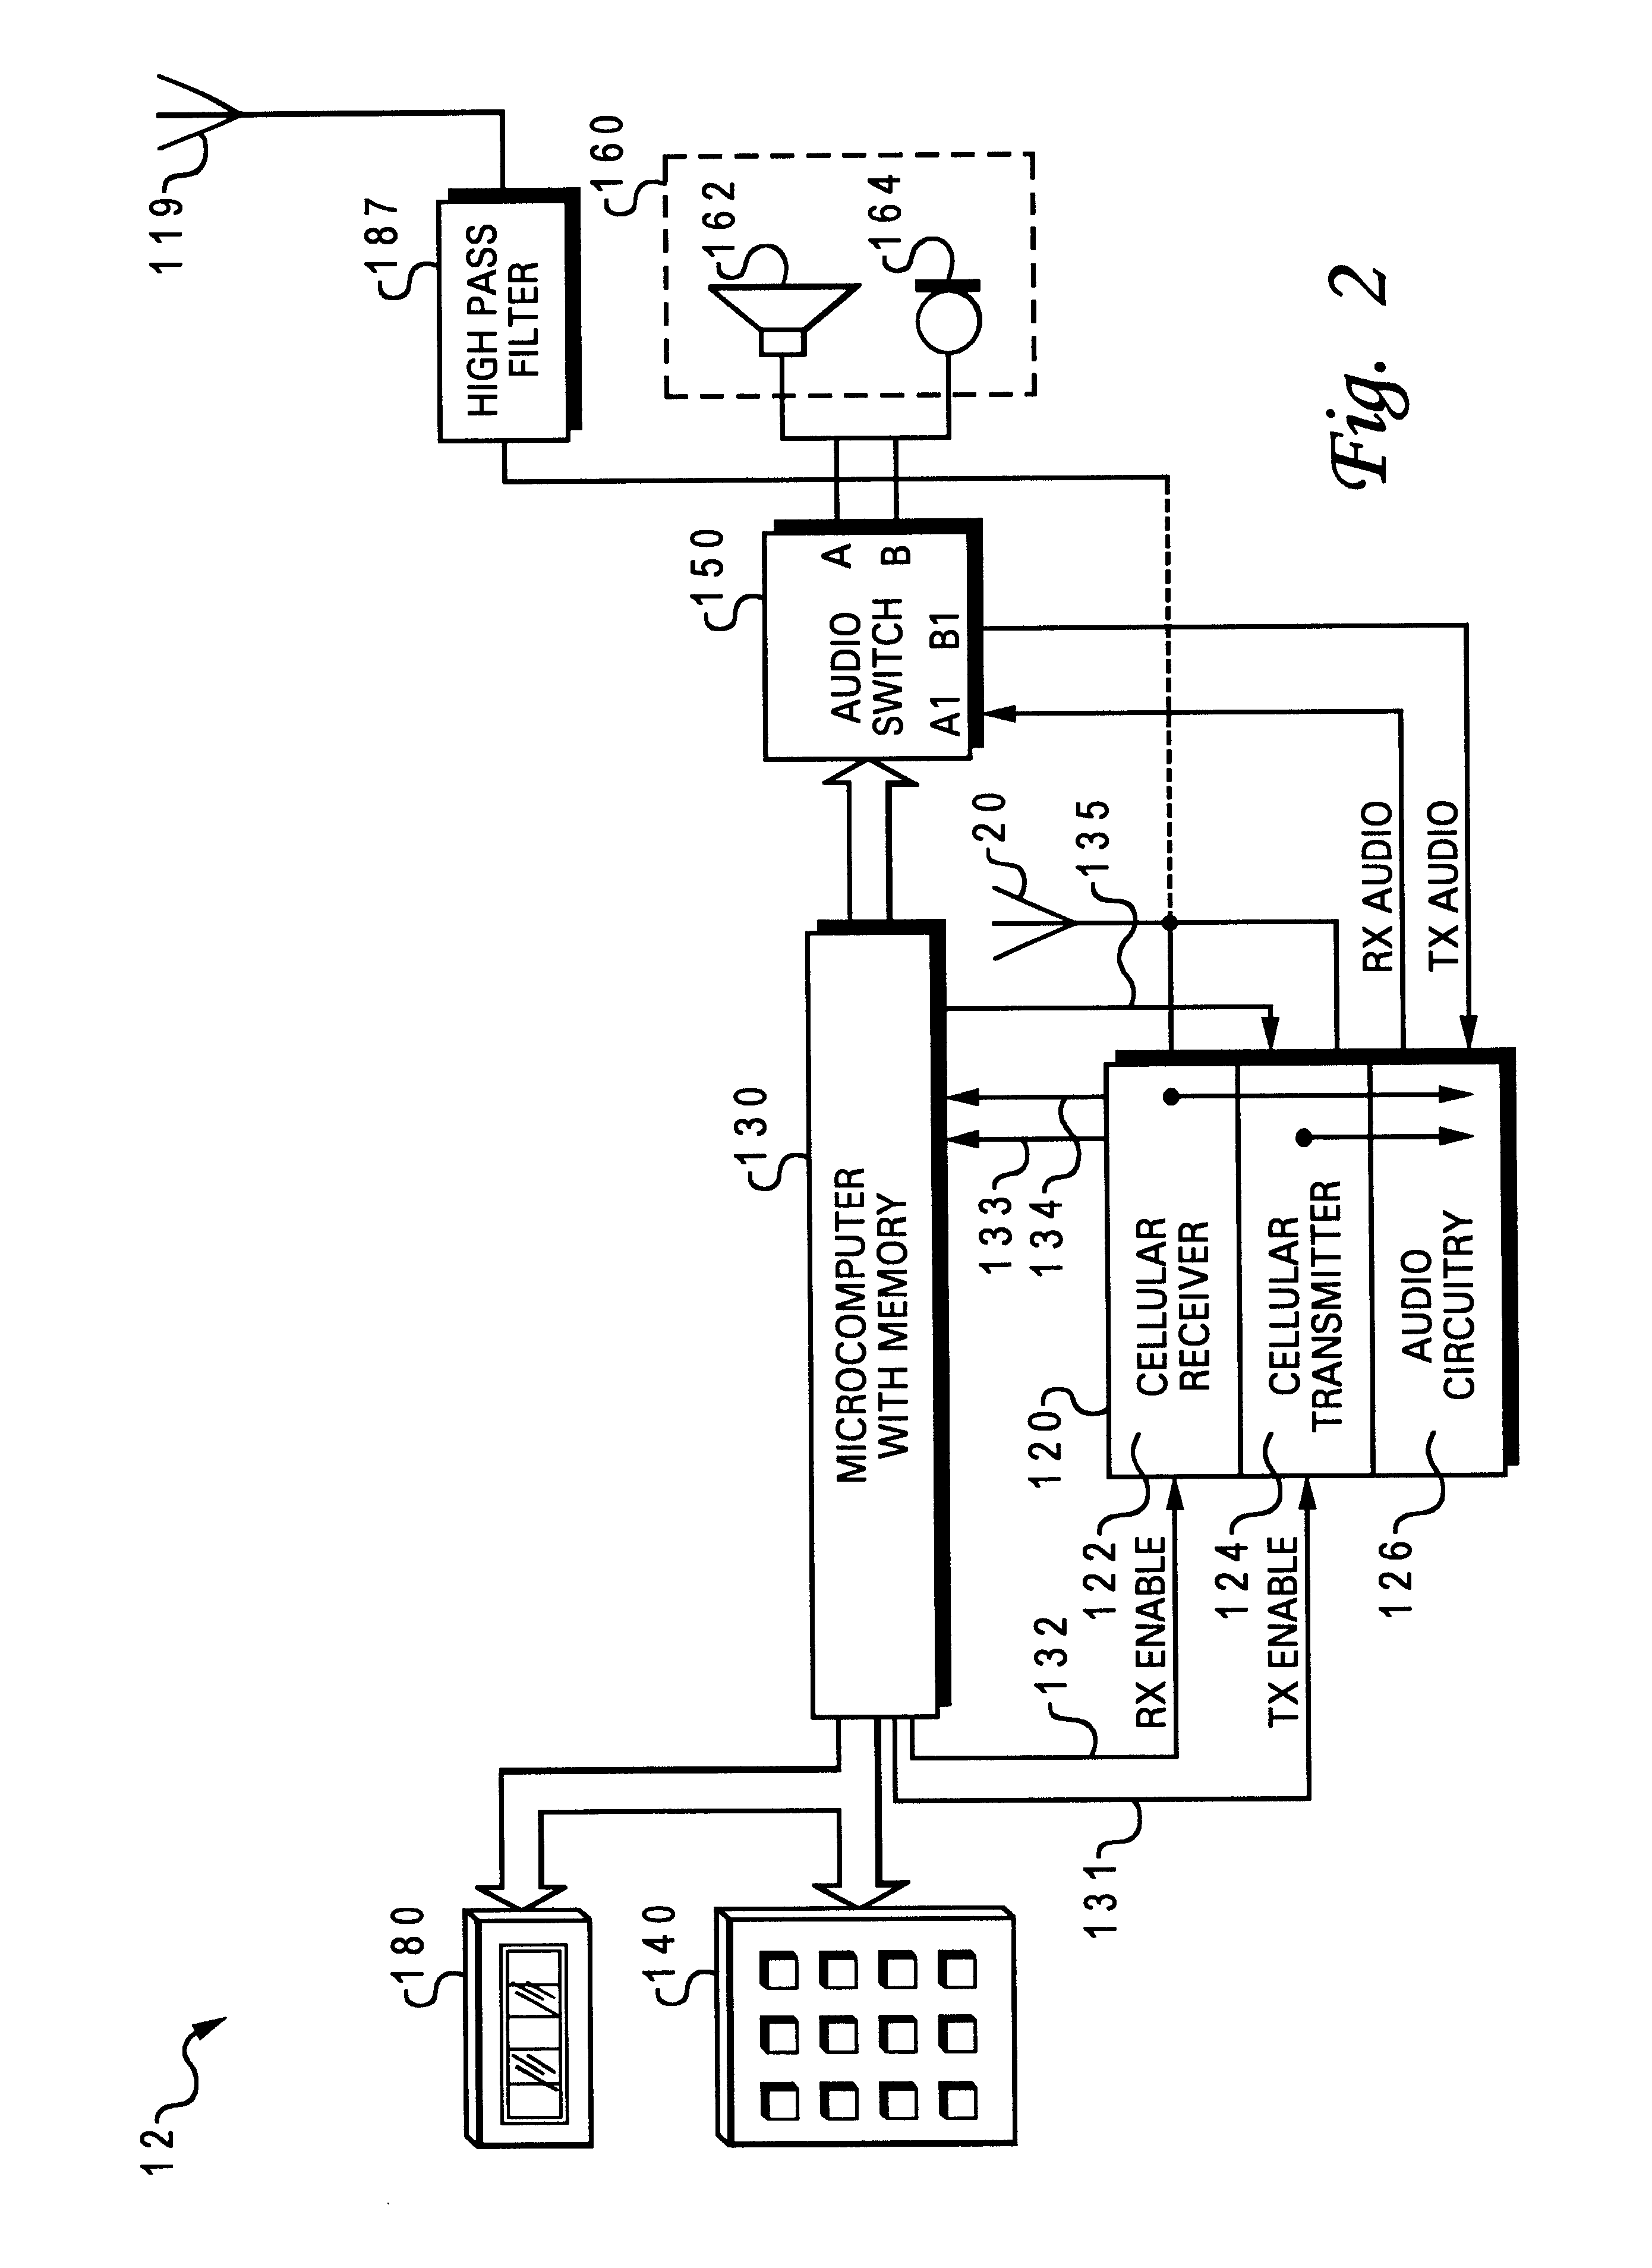 Method and system in a wireless communications network for the simultaneous transmission of both voice and non-voice data over a single radio frequency channel